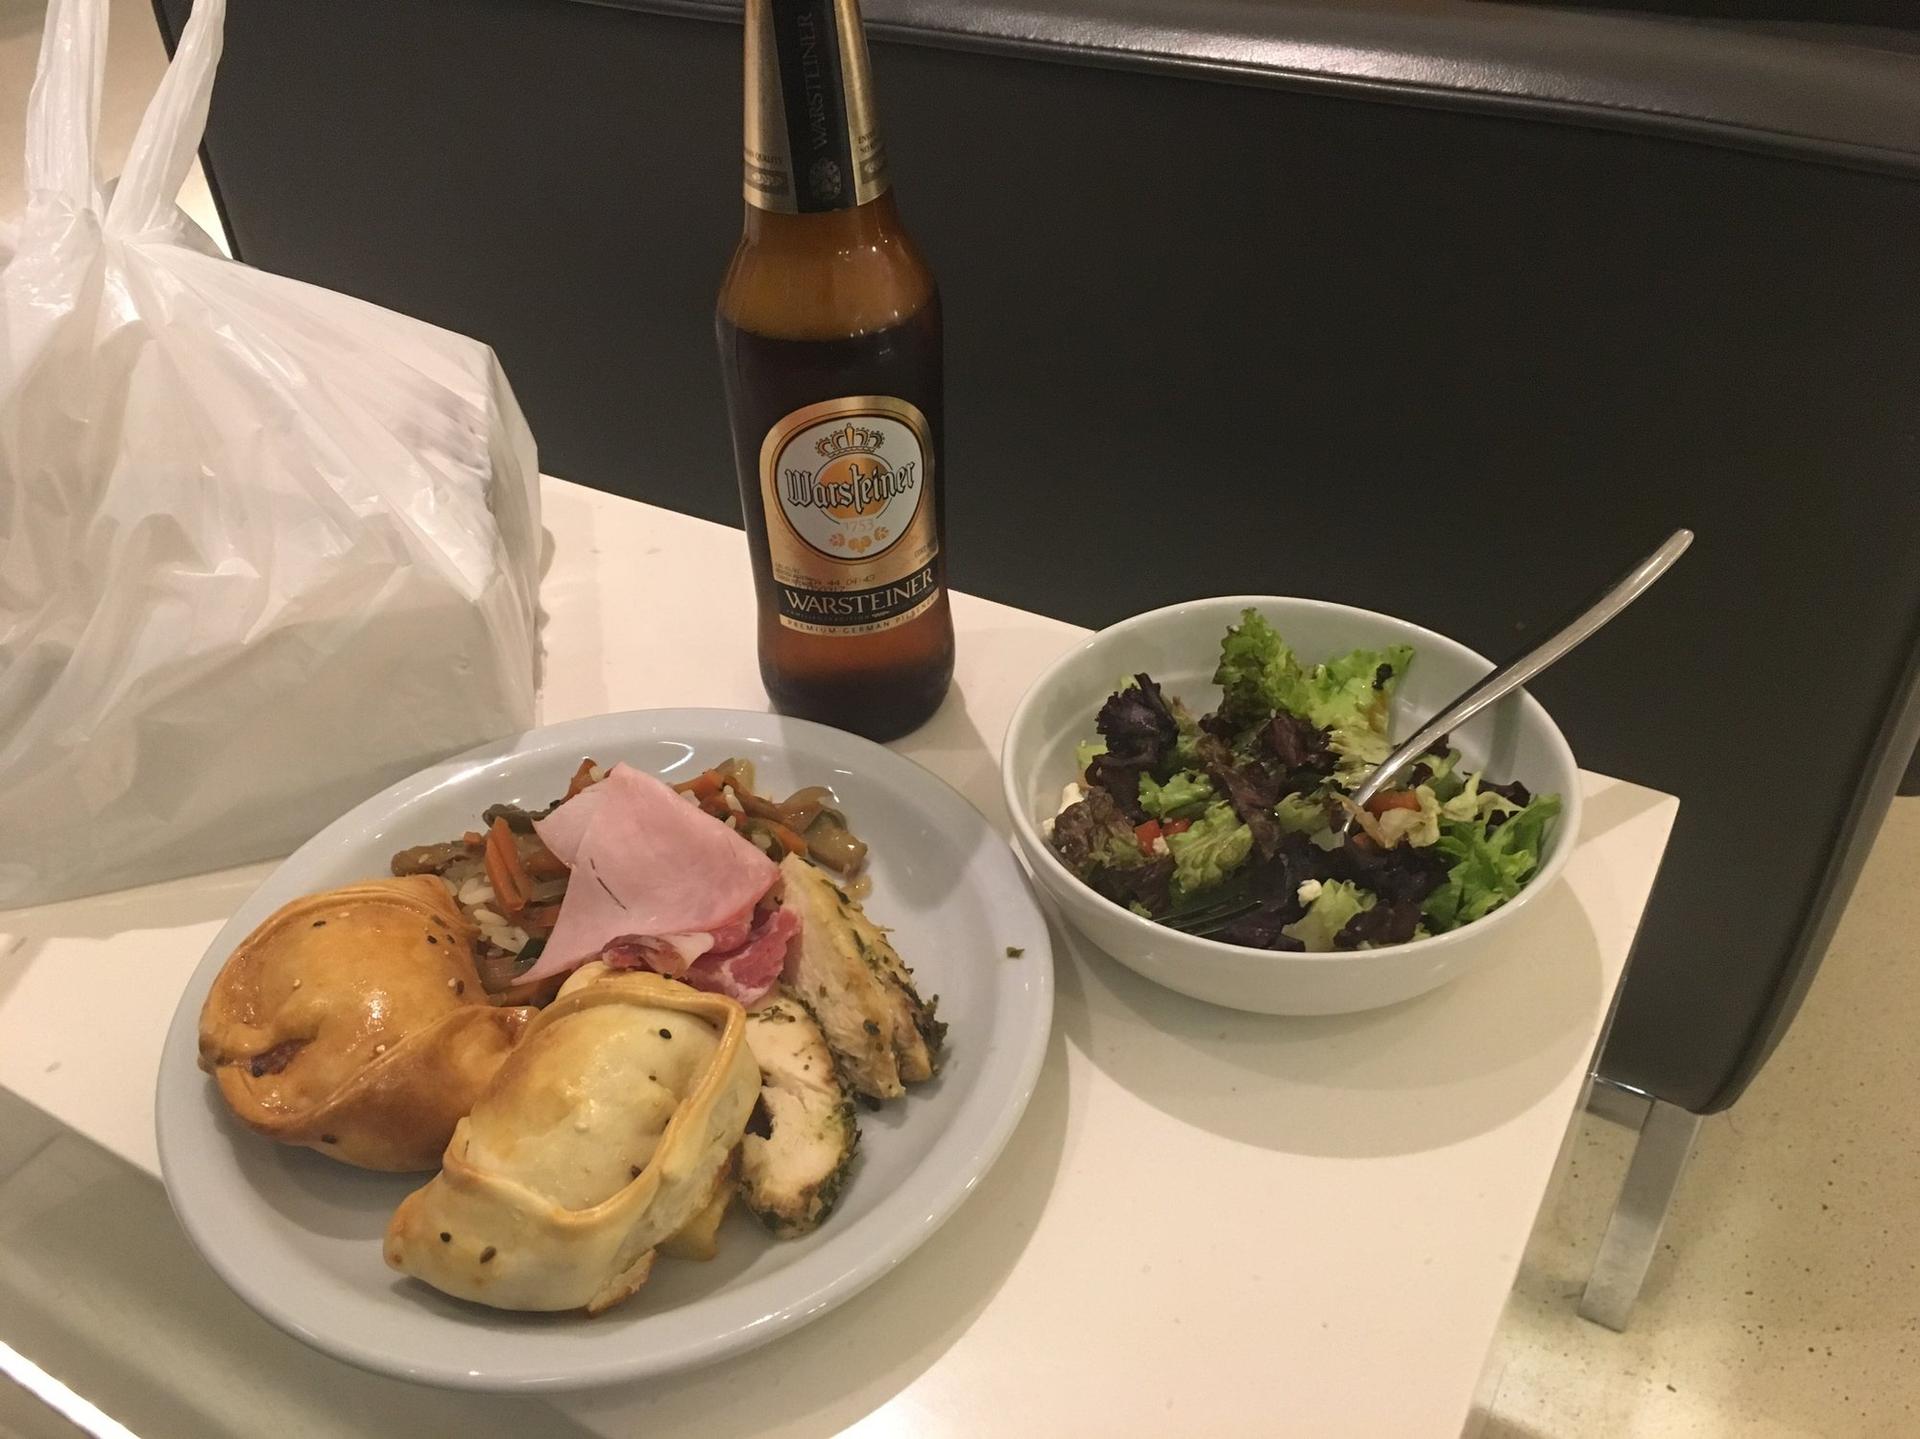 American Airlines Admirals Club & Iberia VIP Lounge image 14 of 18